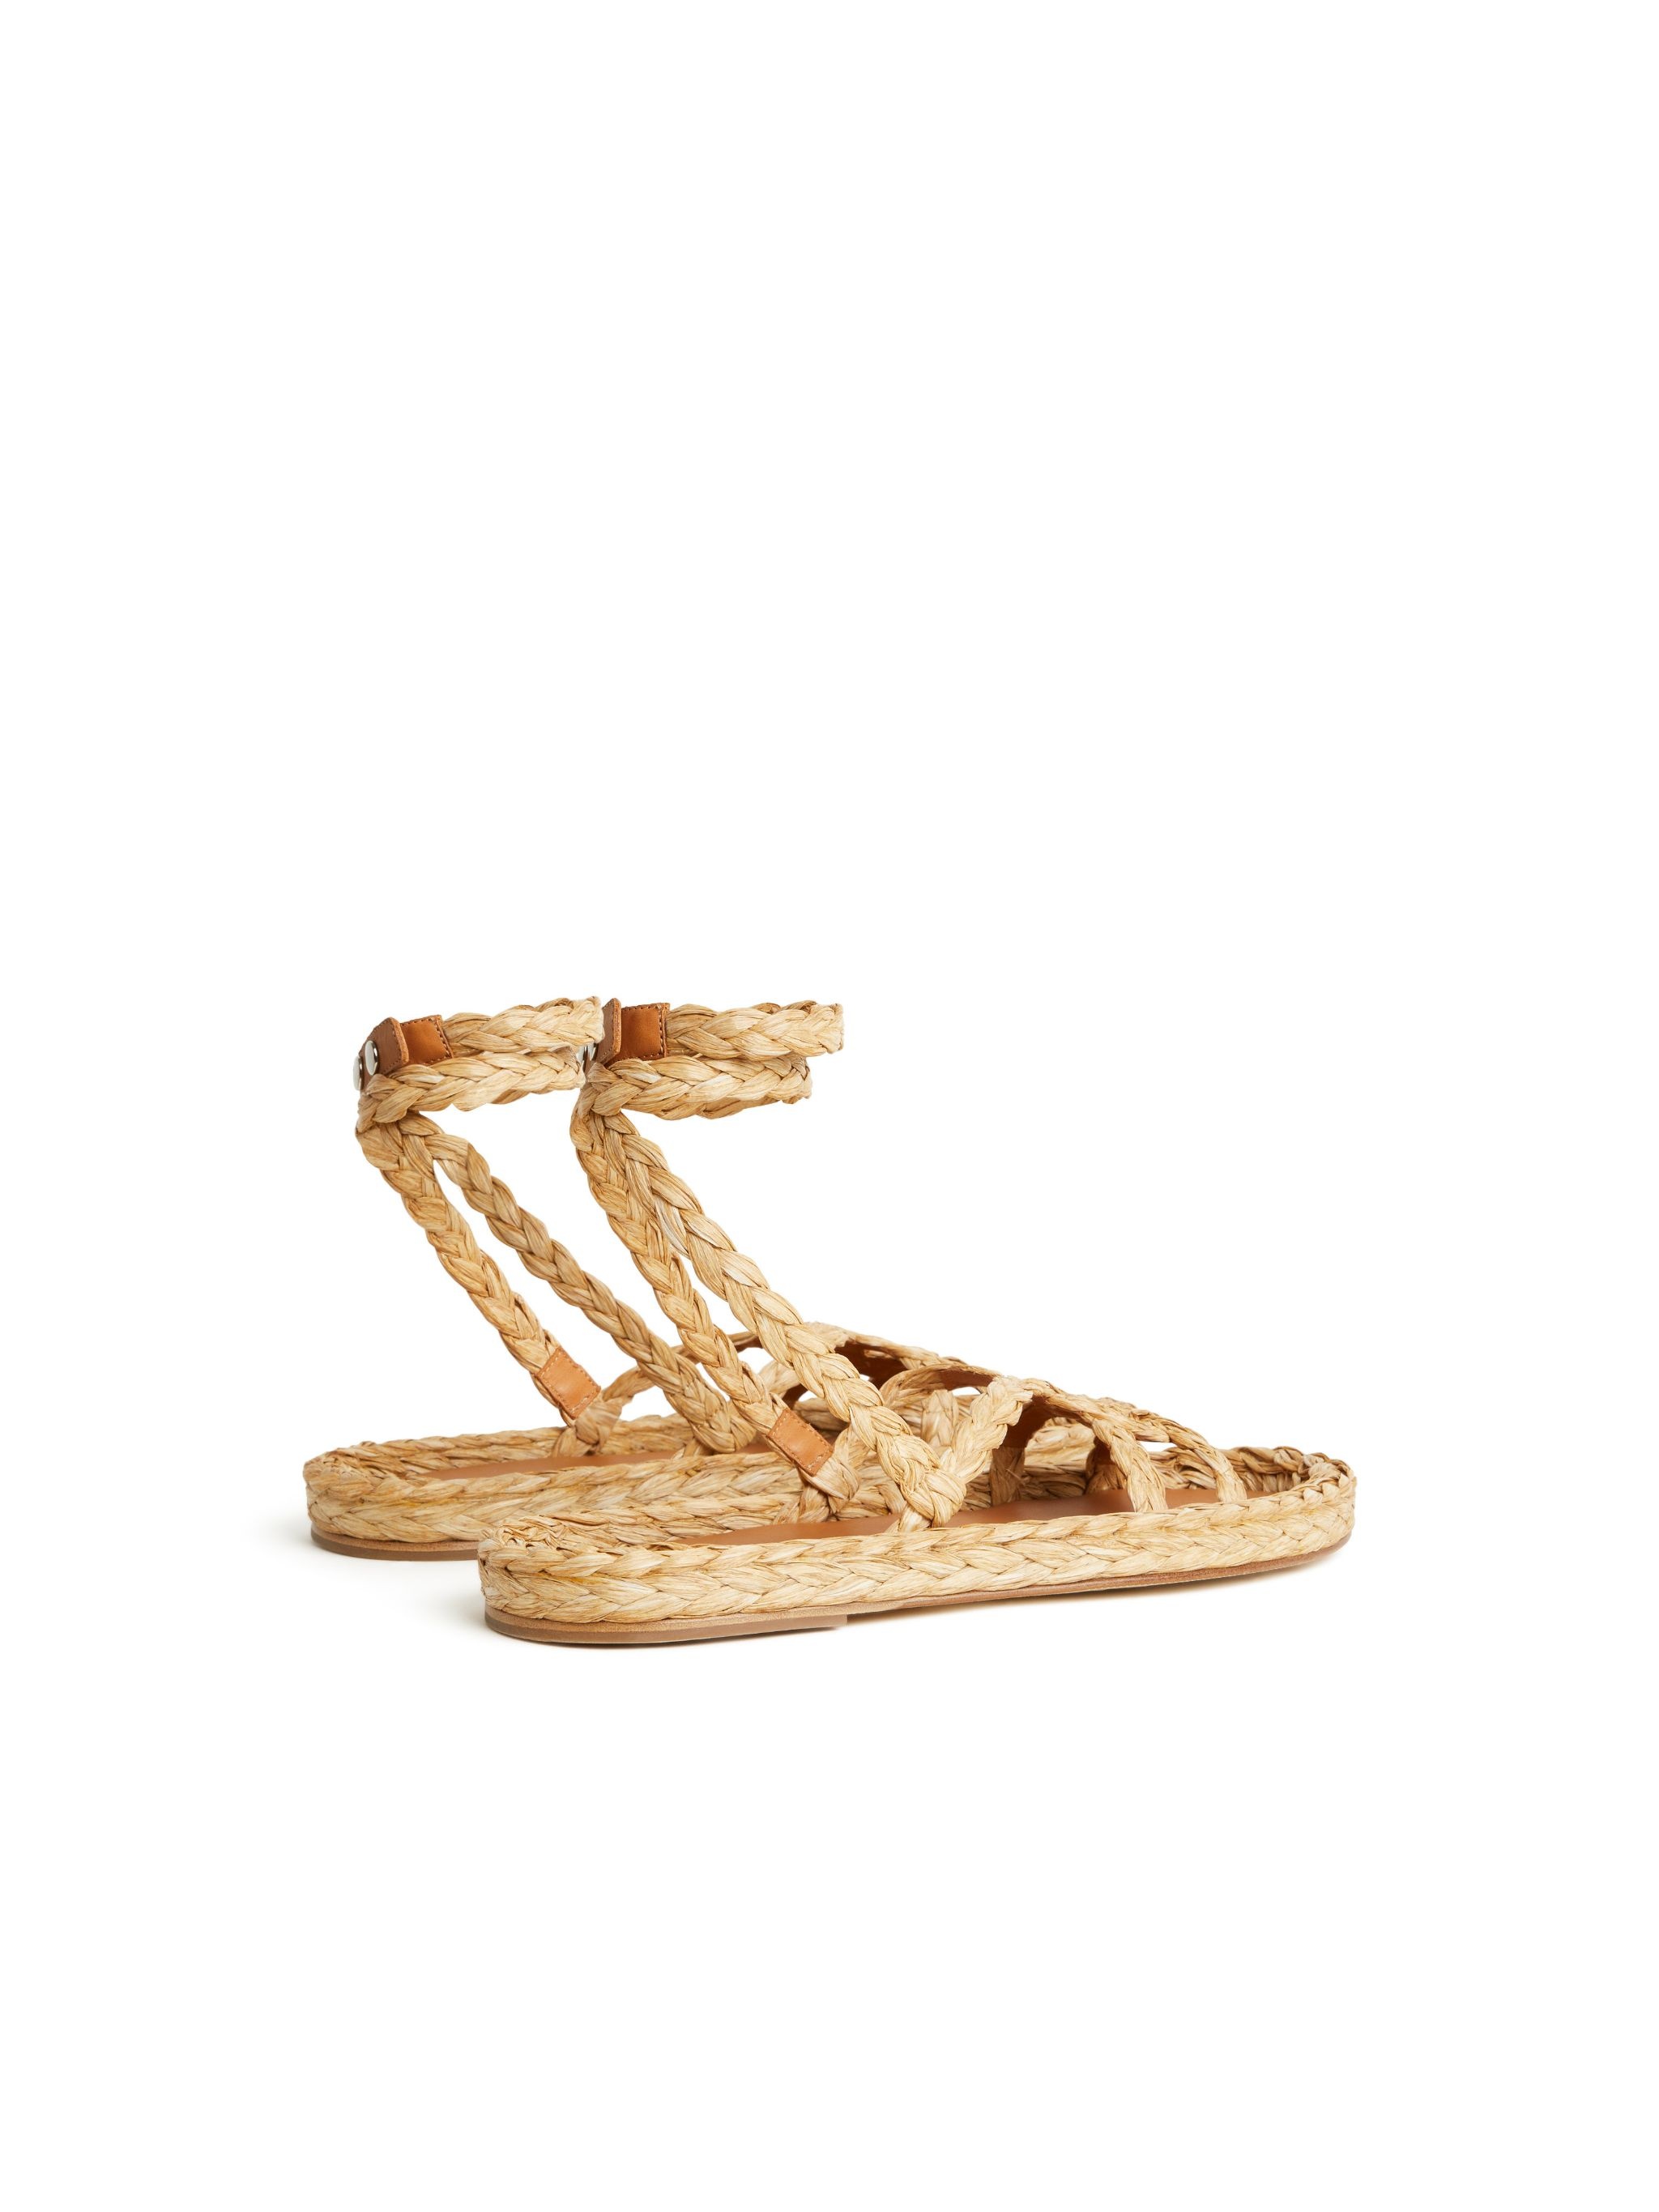 A Love Letter To India Sandals - 4